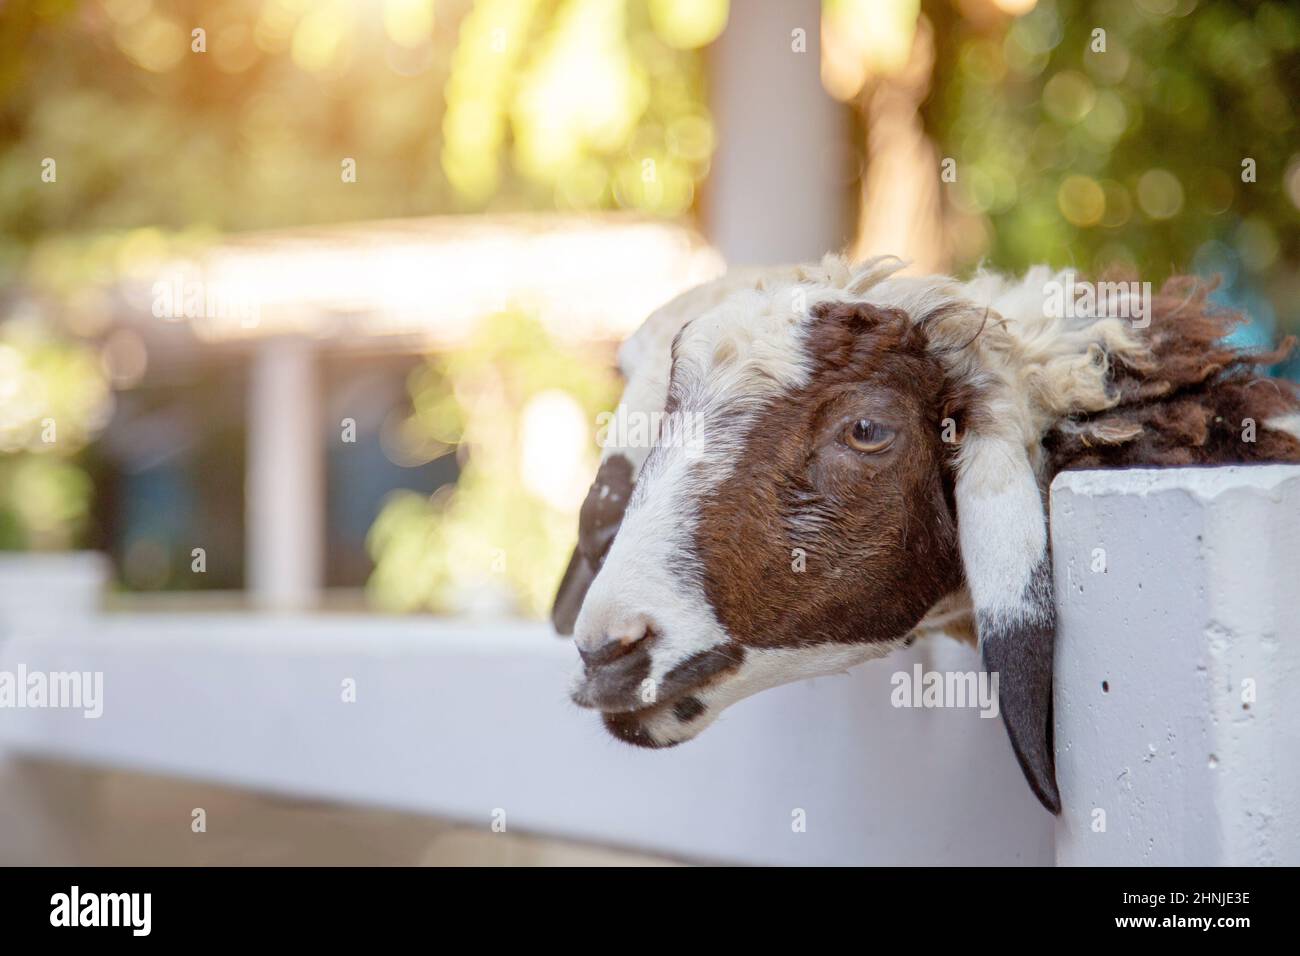 polity eyes of goat in farm cage waiting for feeding Stock Photo